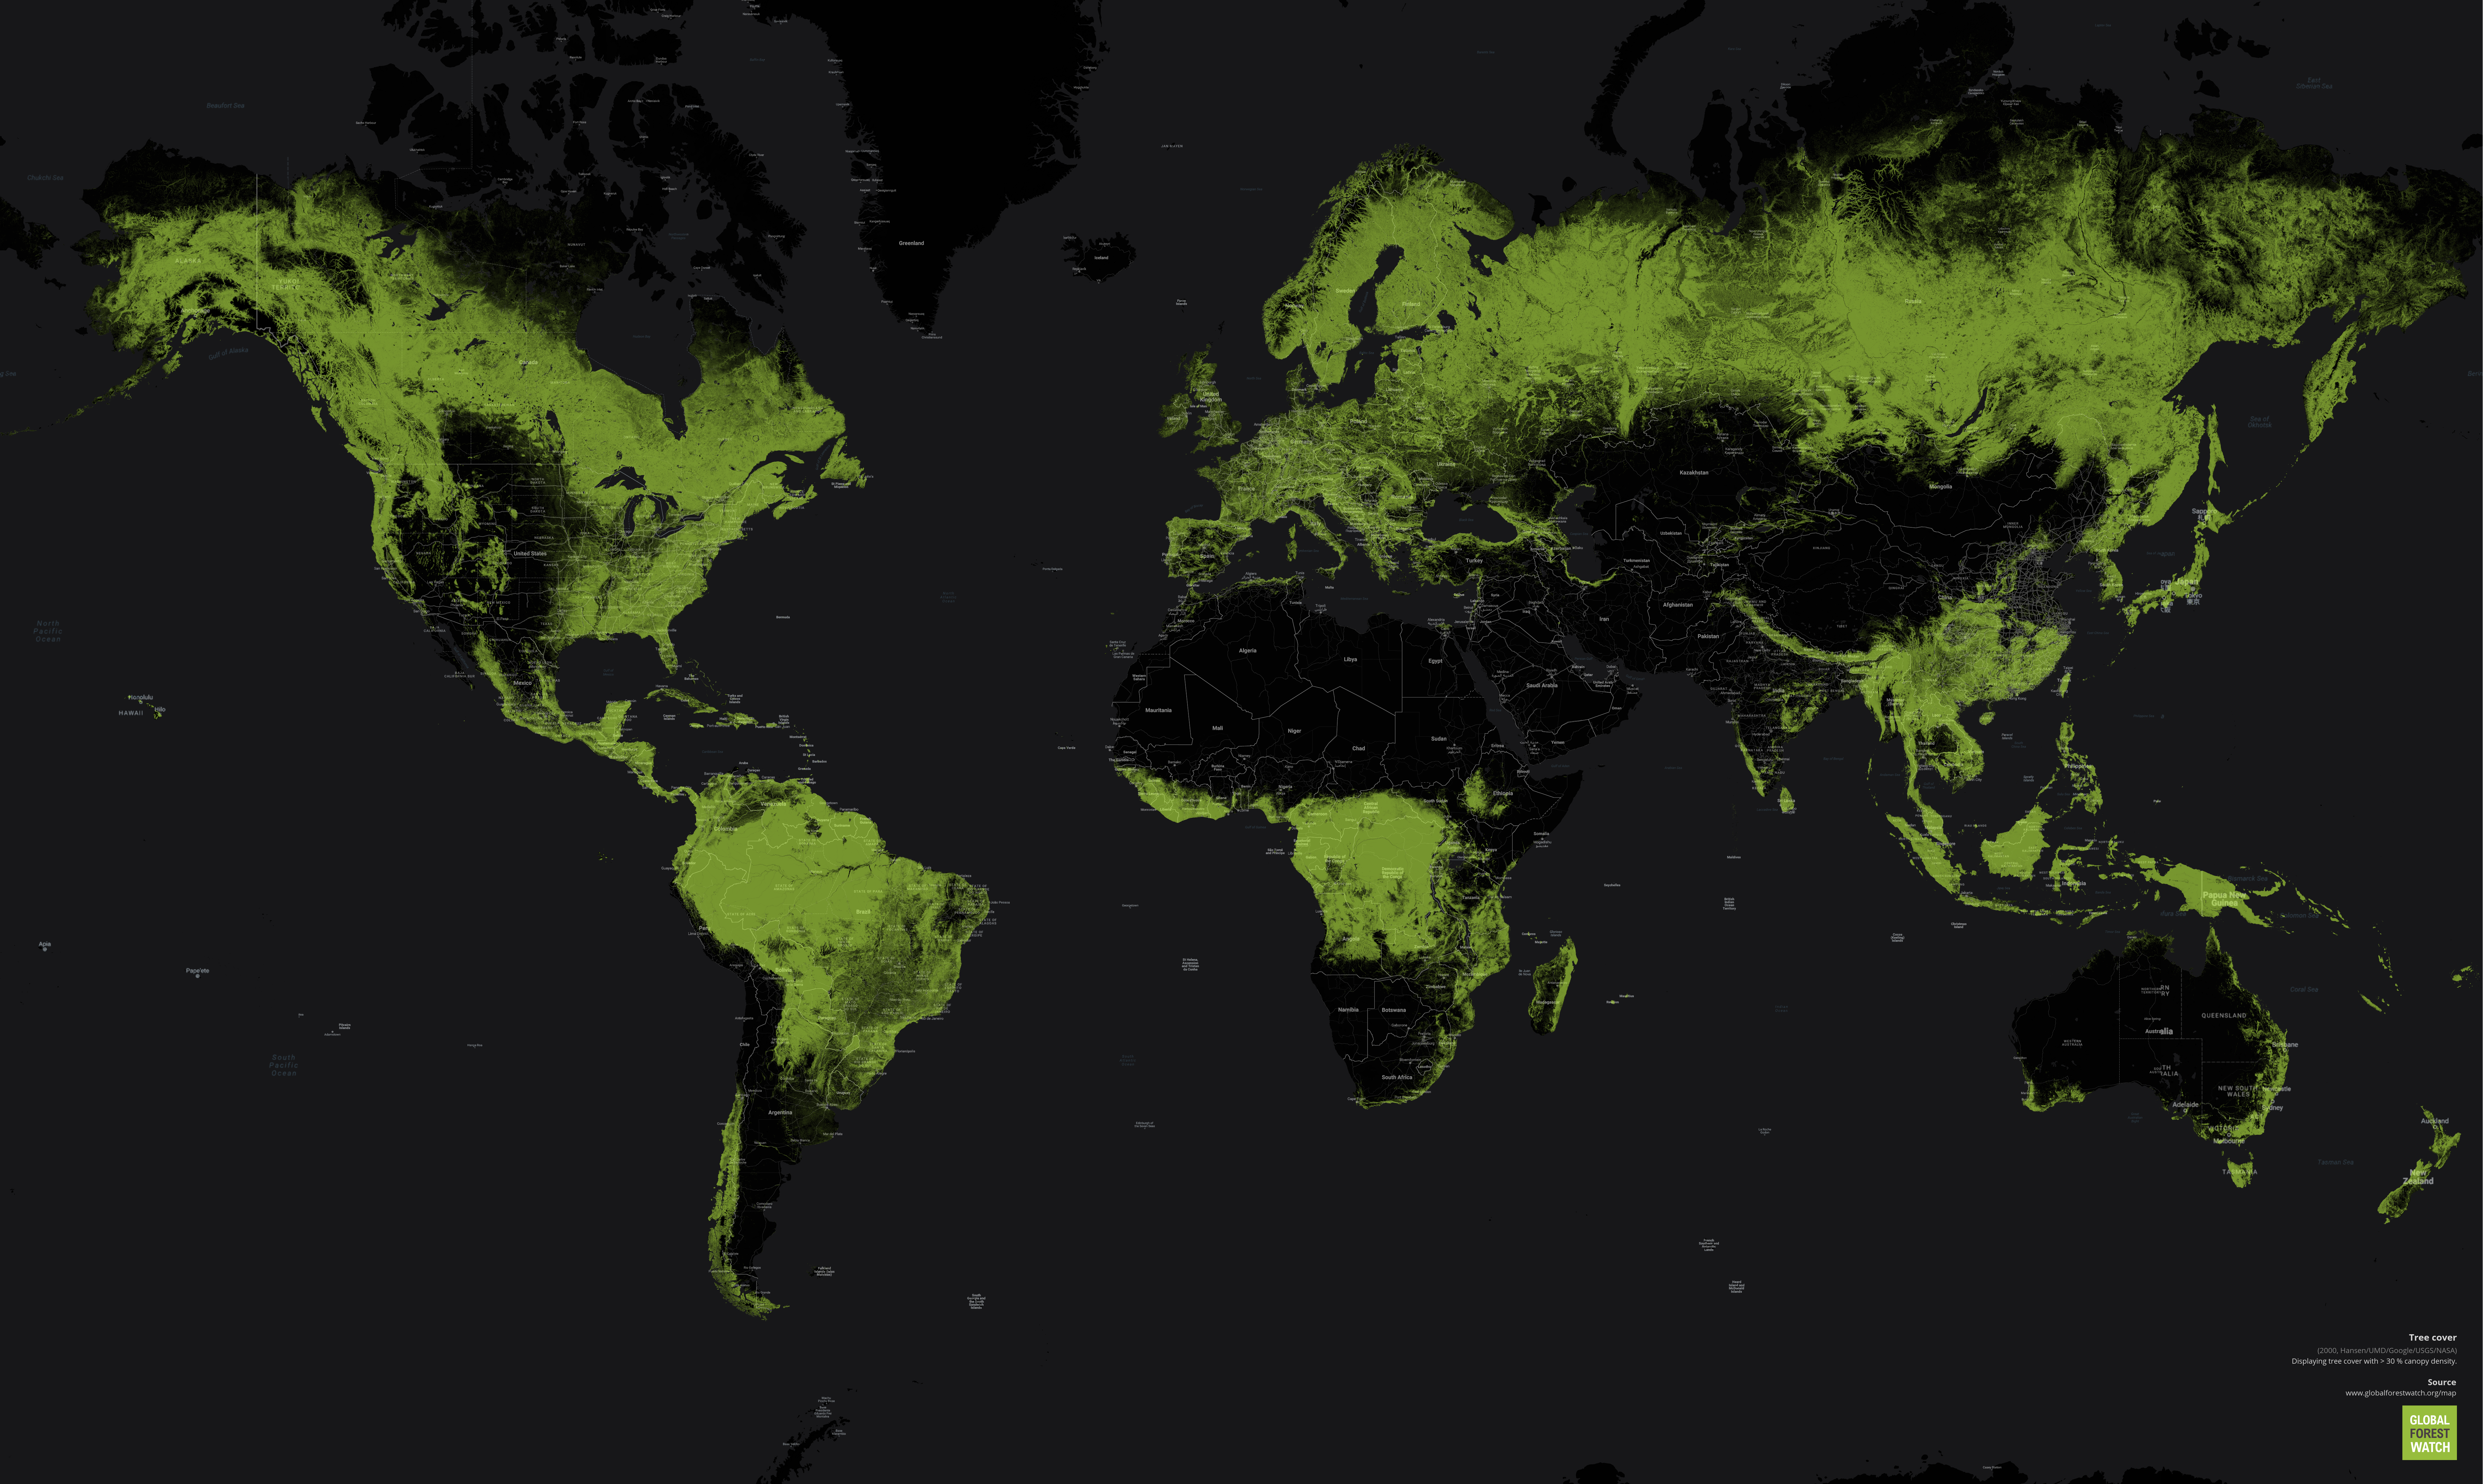 A Snapshot of the World’s Forests